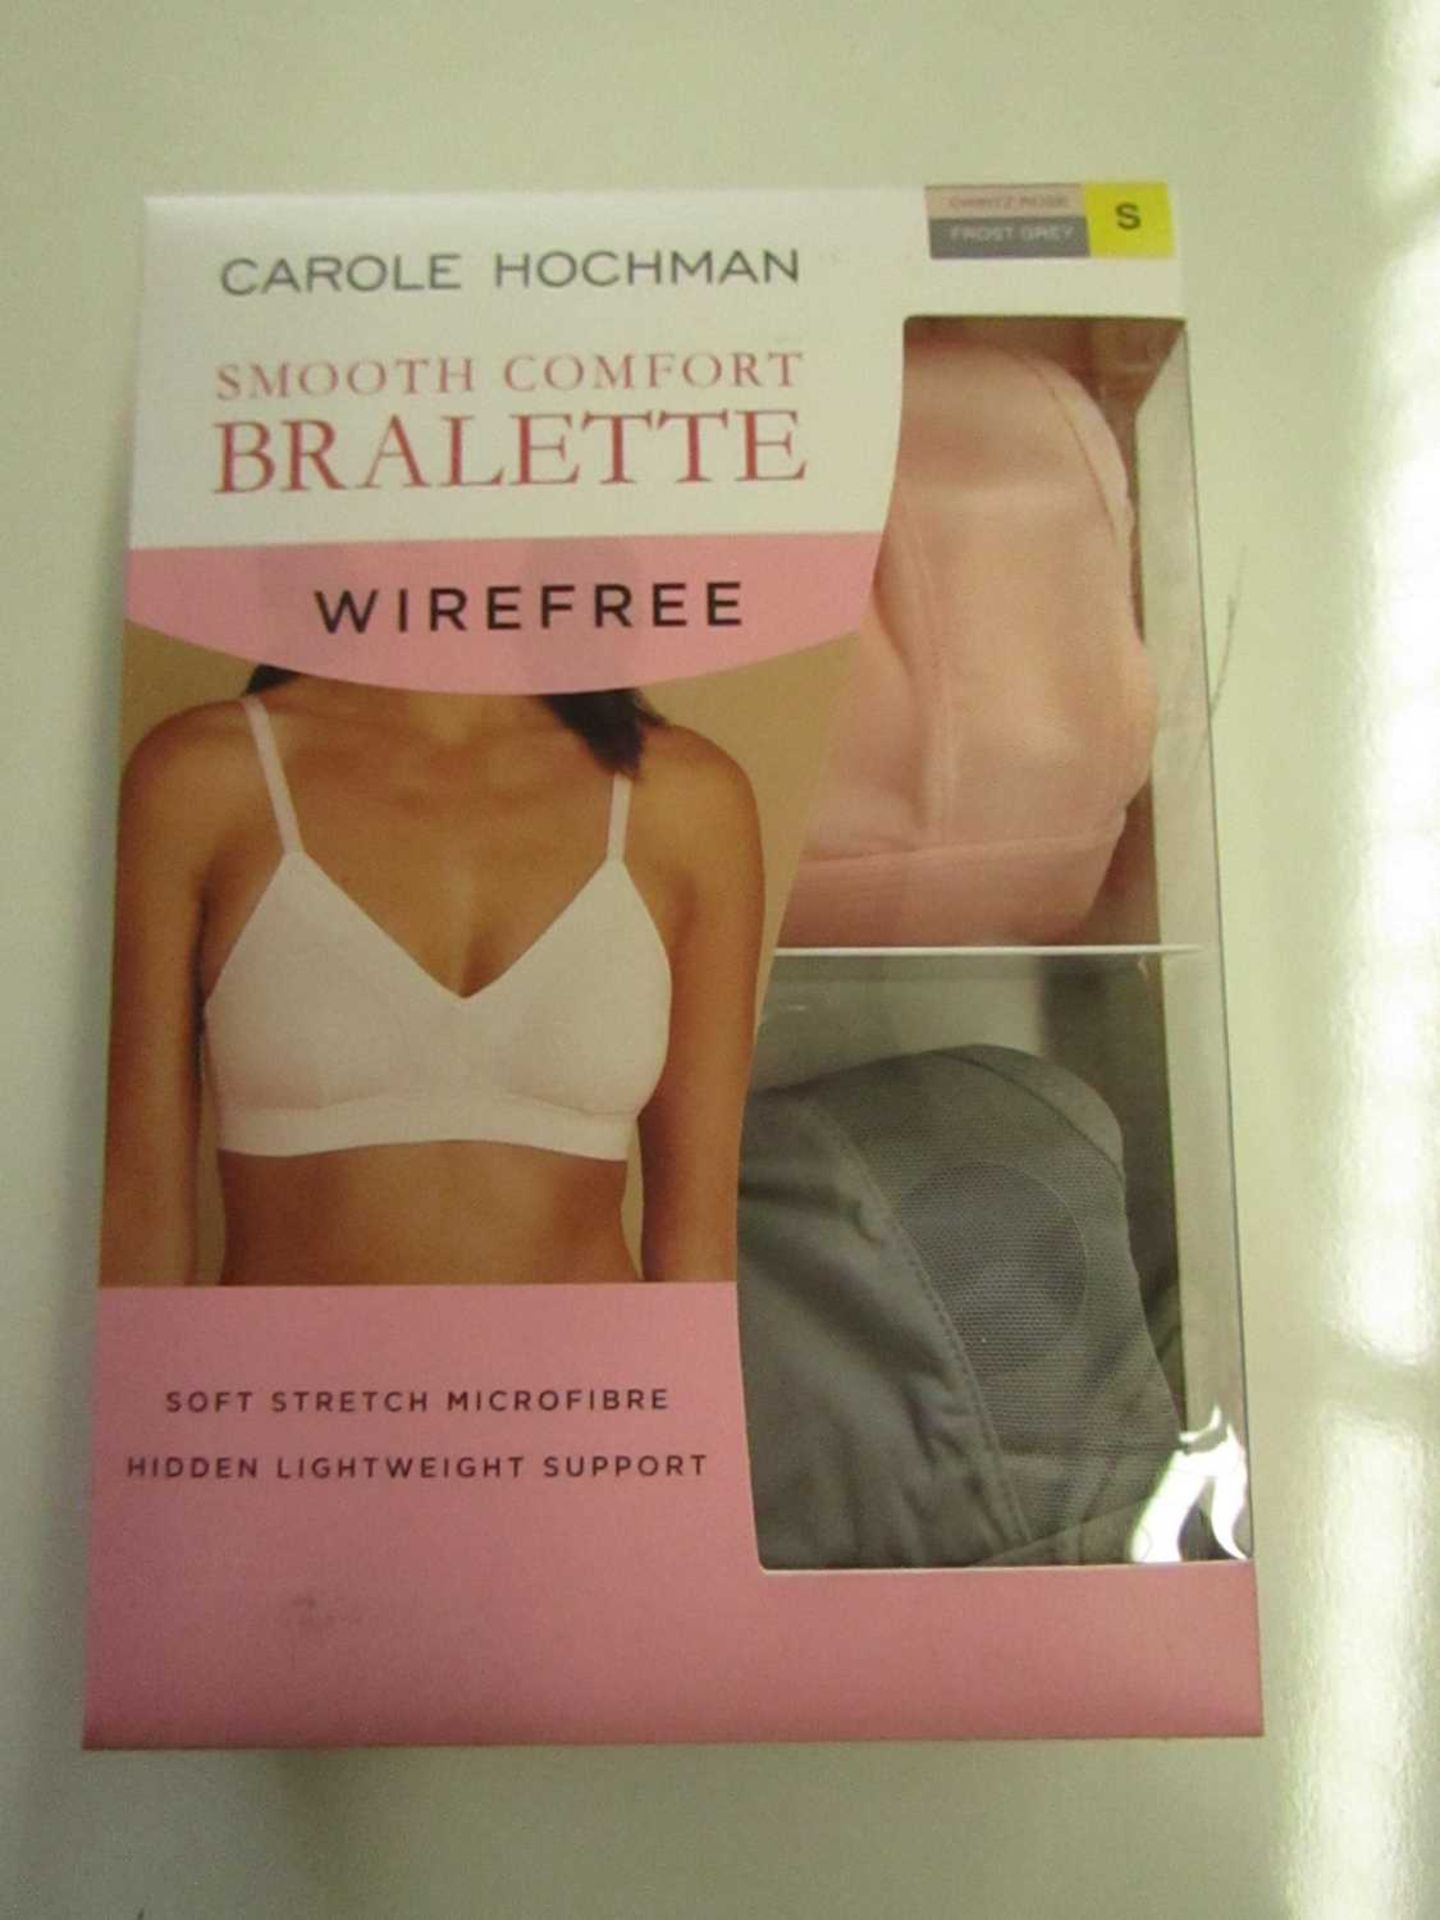 VAT PK of 2 Carole Hochman Wirefree Bralette Size S New & Boxed (Picked at Randon So Colours Will